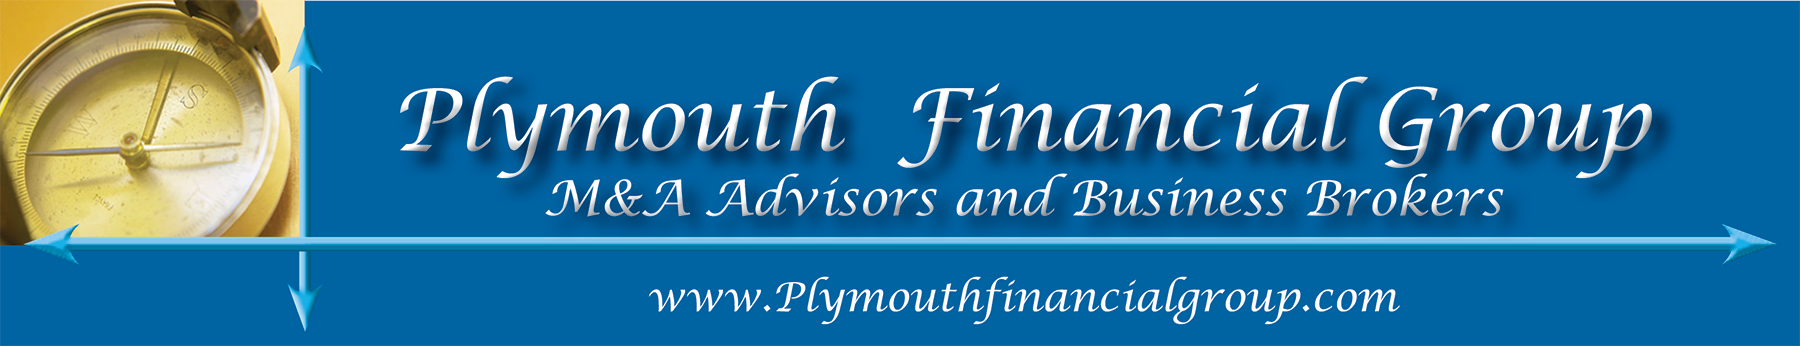 Plymouth Financial Group